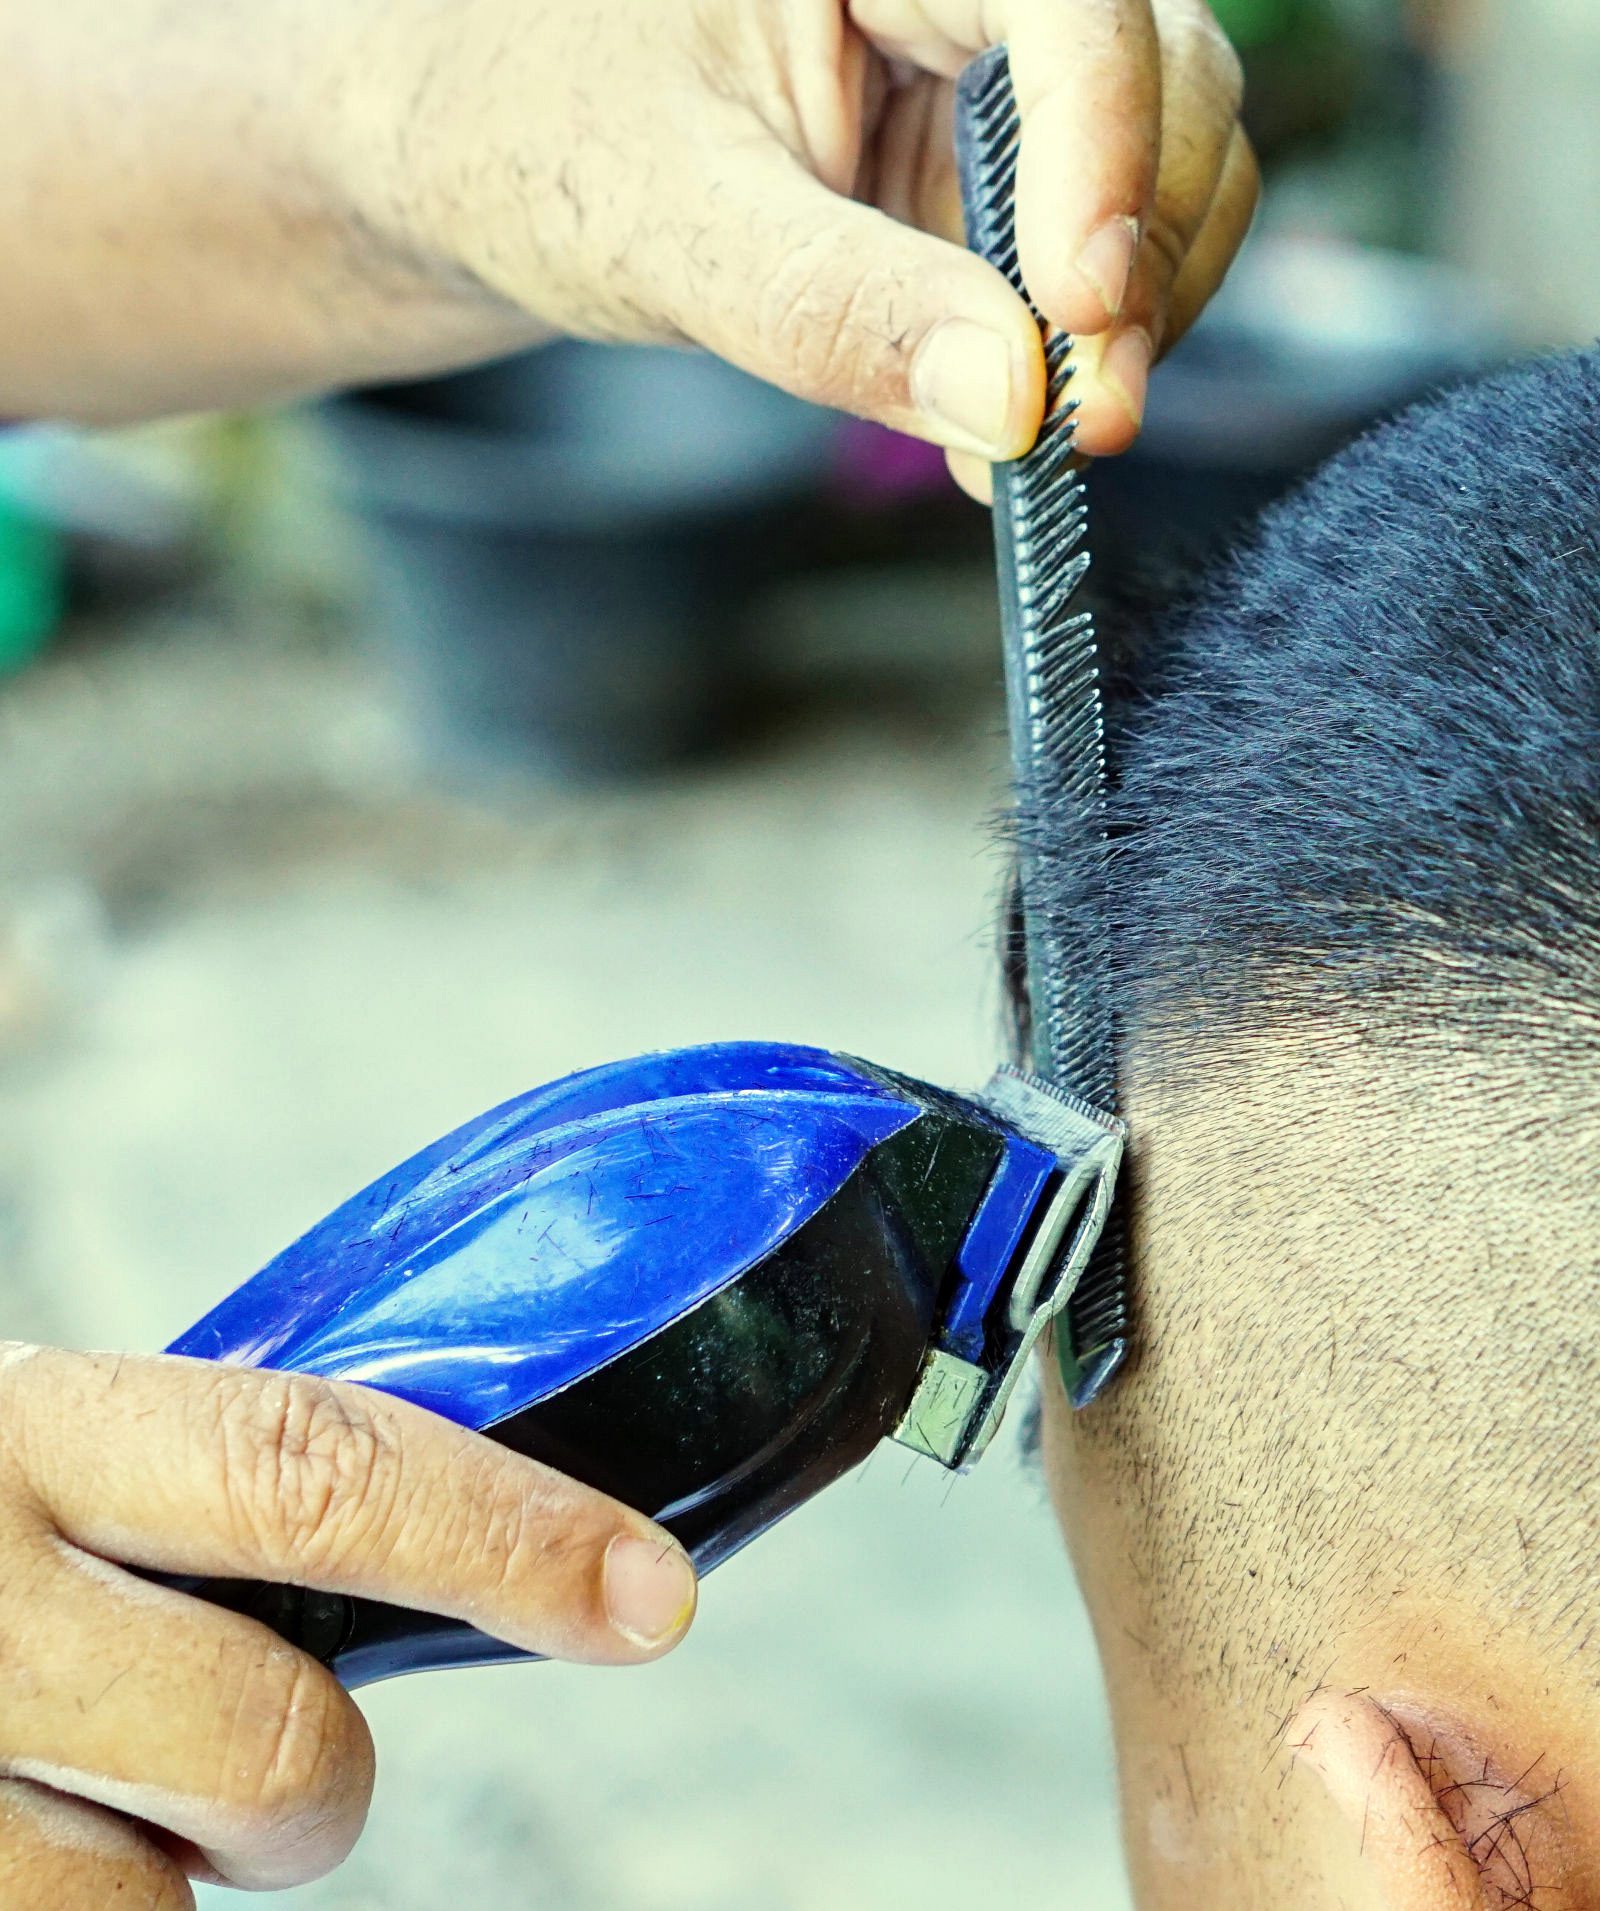 cutting men's hair with clippers blending